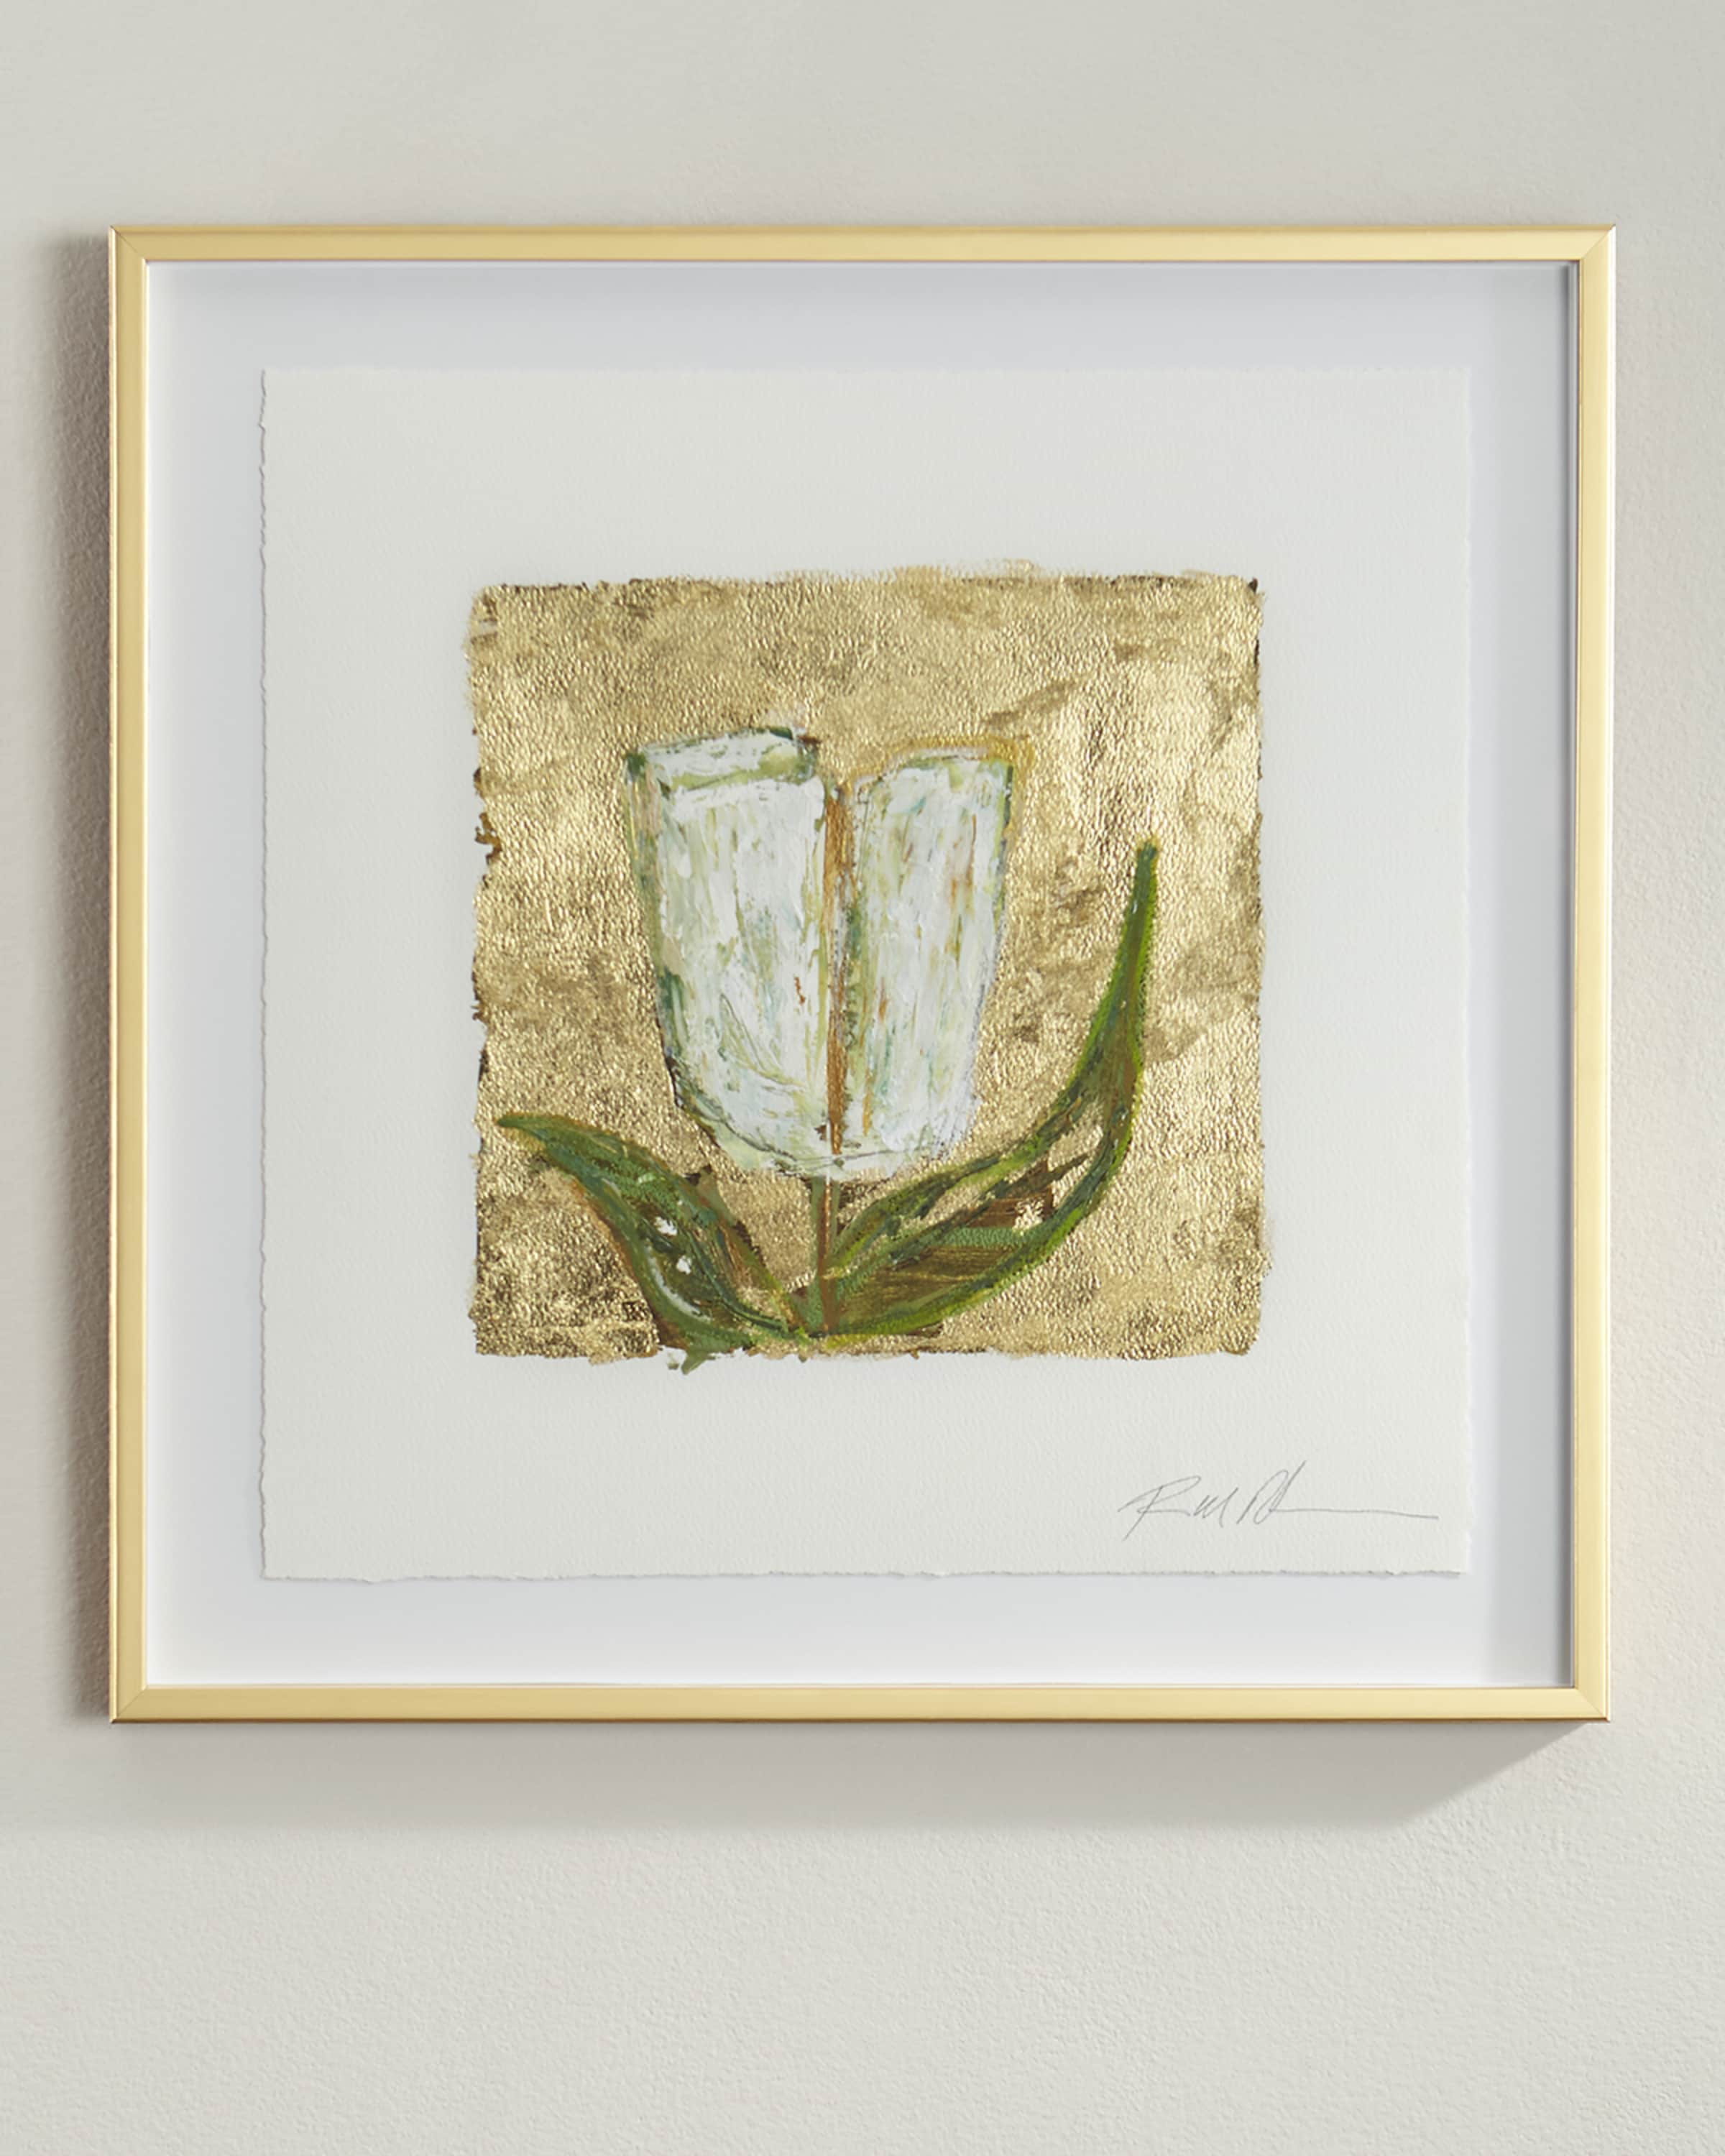 RFA Fine Art "Gold and Tulips" Giclee on Paper Wall Art